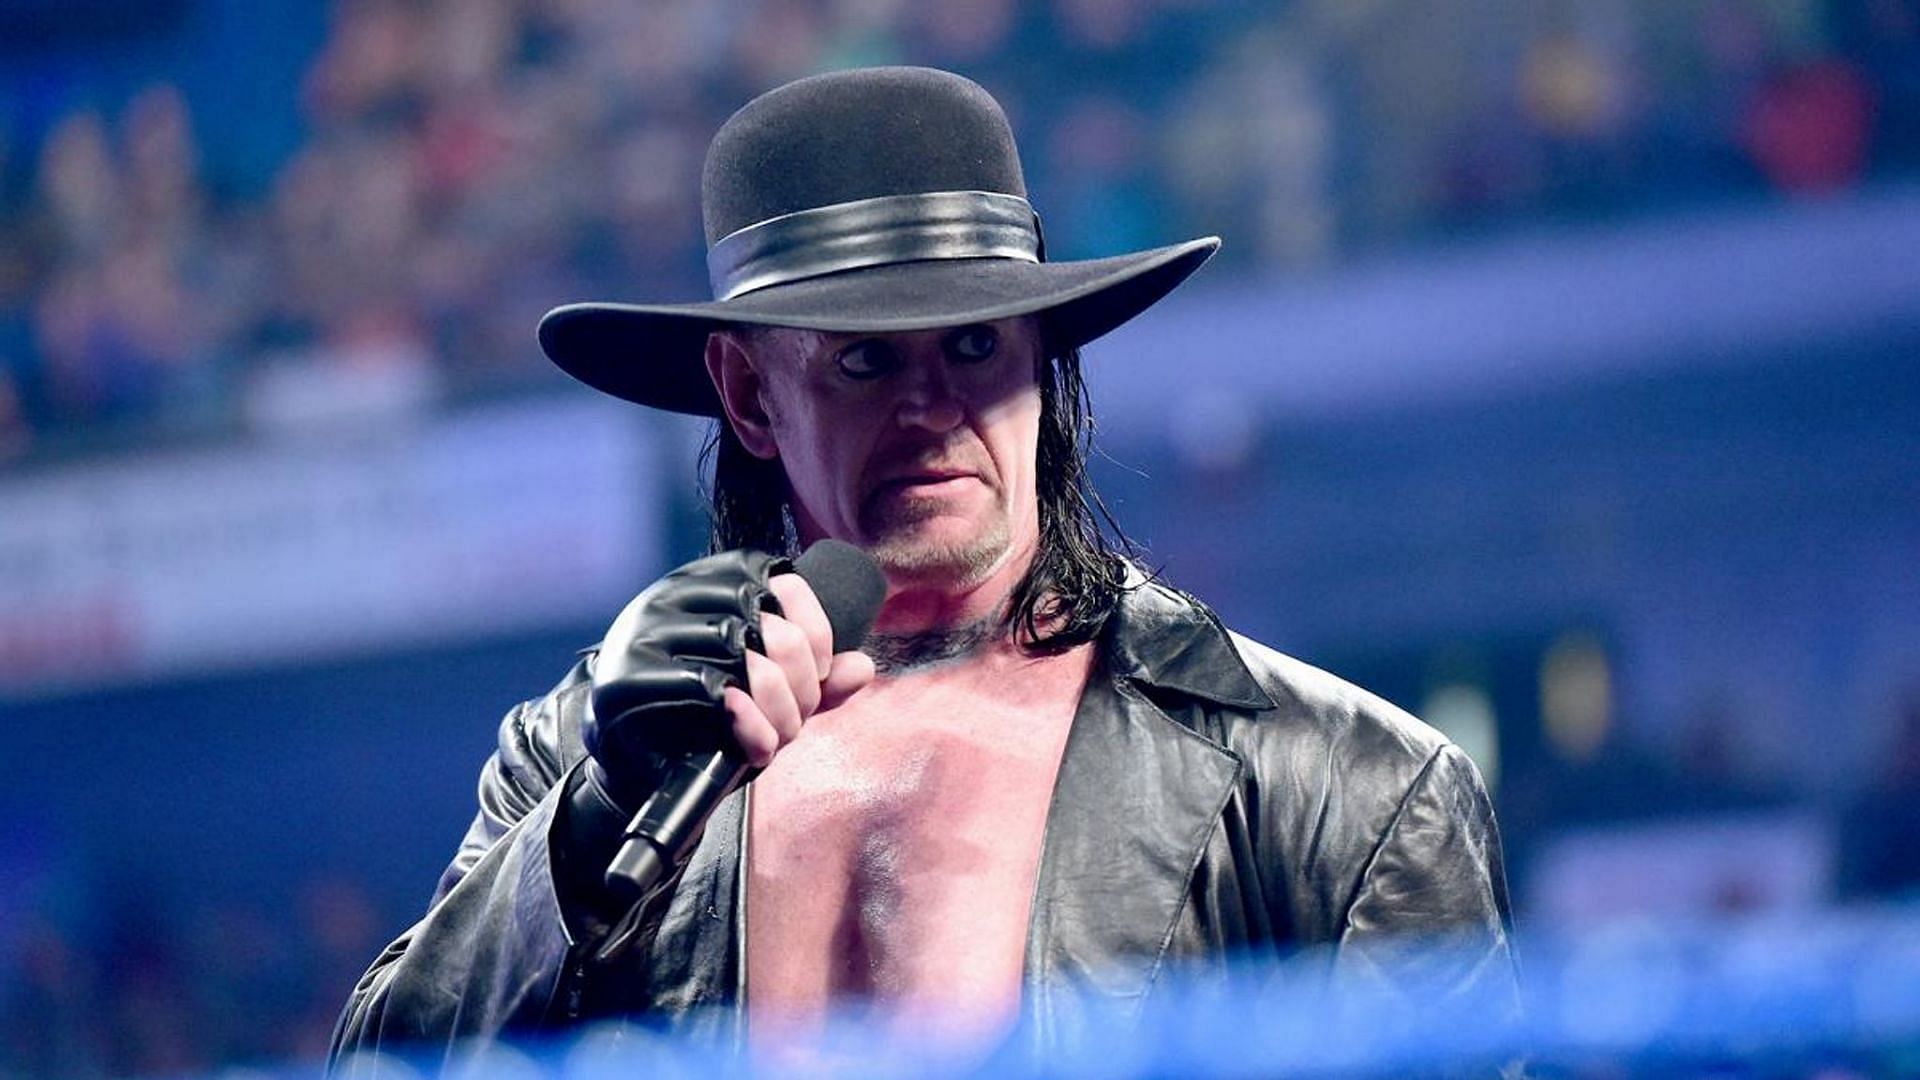 The Undertaker was to make an appearance at Elimination Chamber.